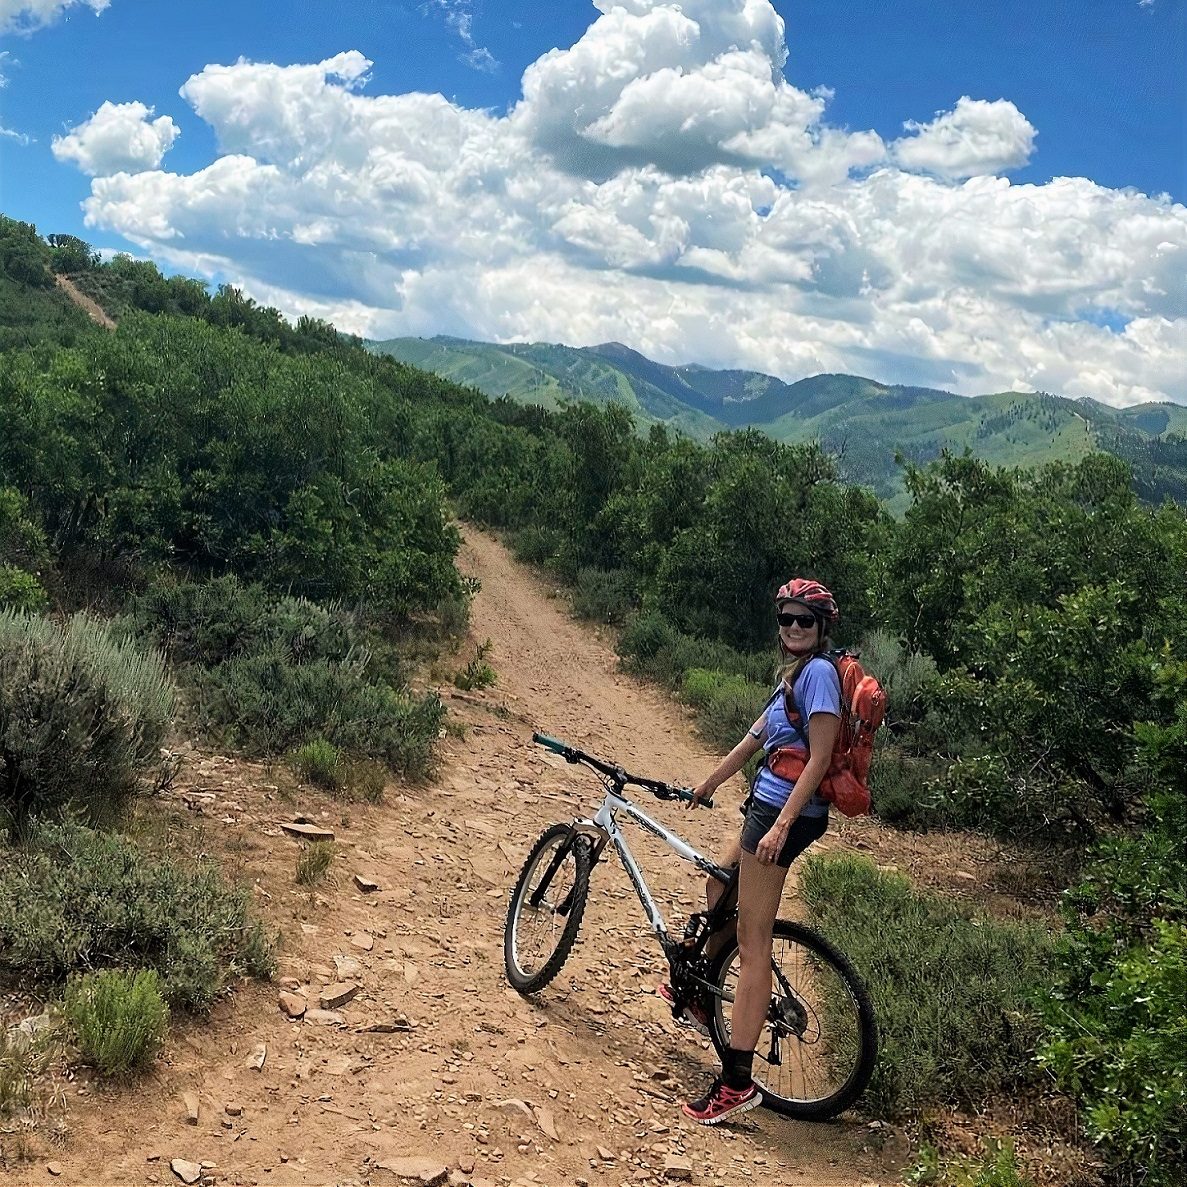 Dr. Kaley Capitano standing next to a bike on a dirt trail surrounded by brush